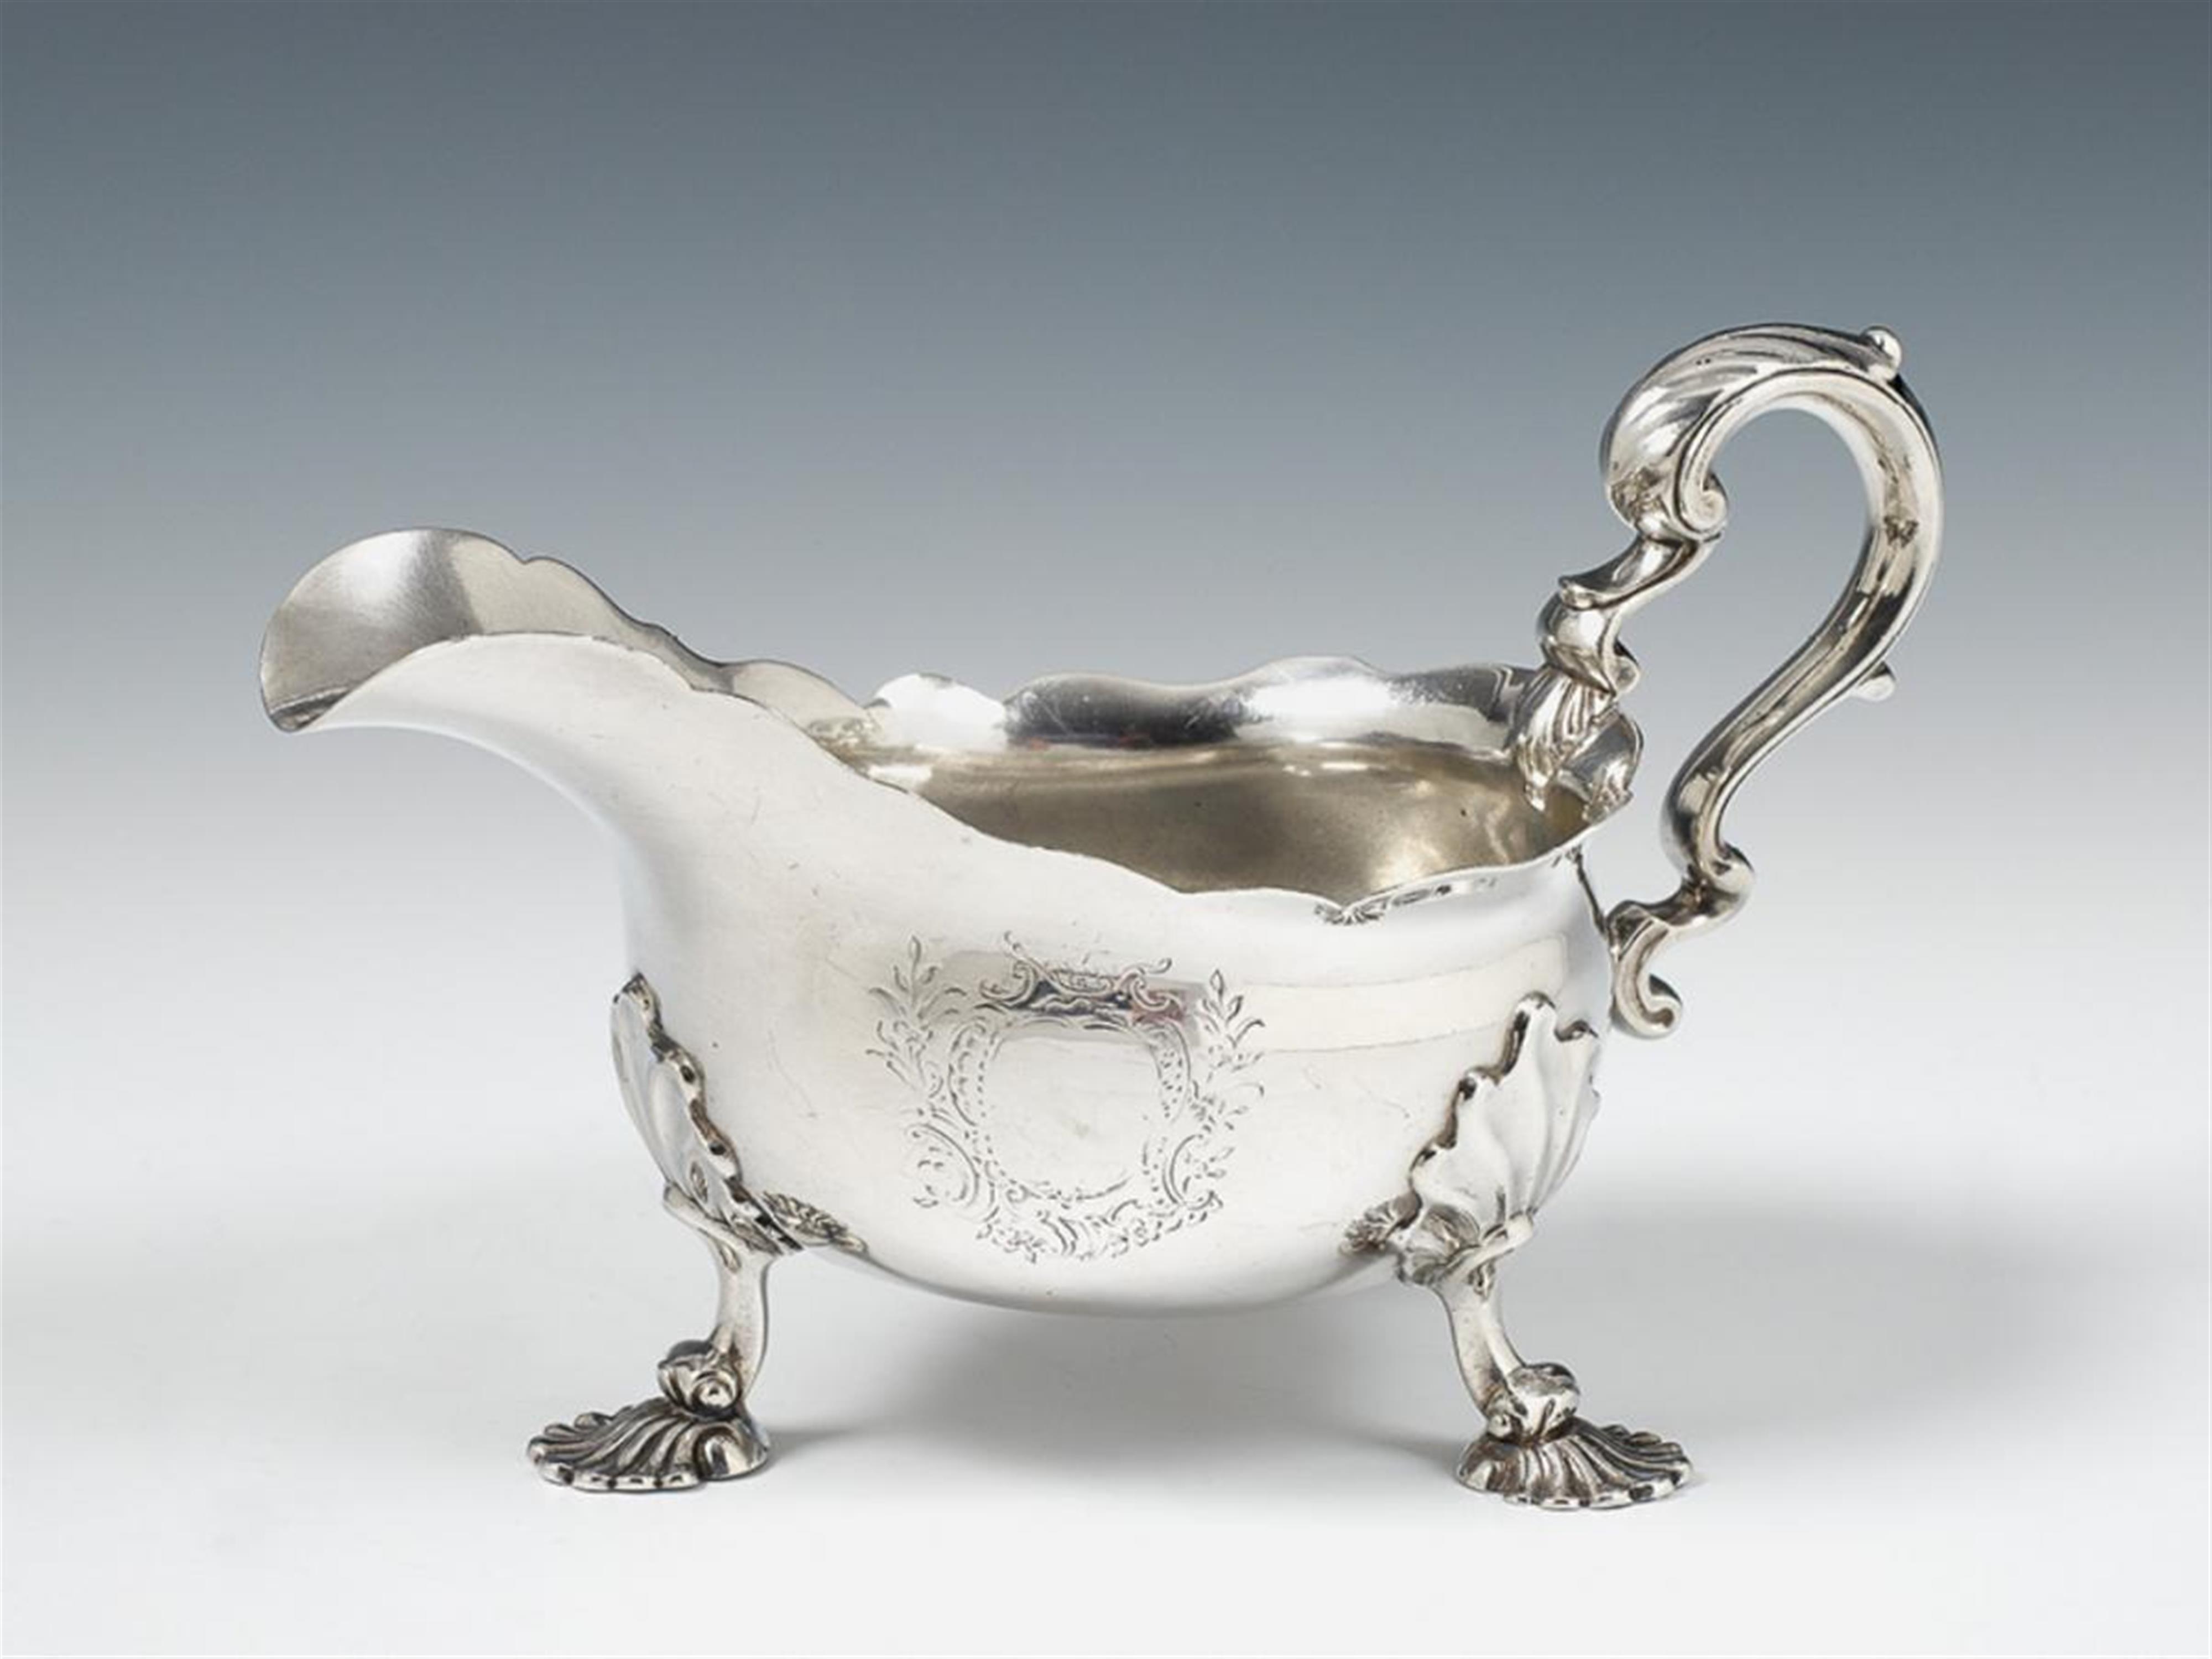 Two George II London silver sauce boats. One with marks of Fuller White, one with indistinct maker's mark, 1739 - 52. - image-1